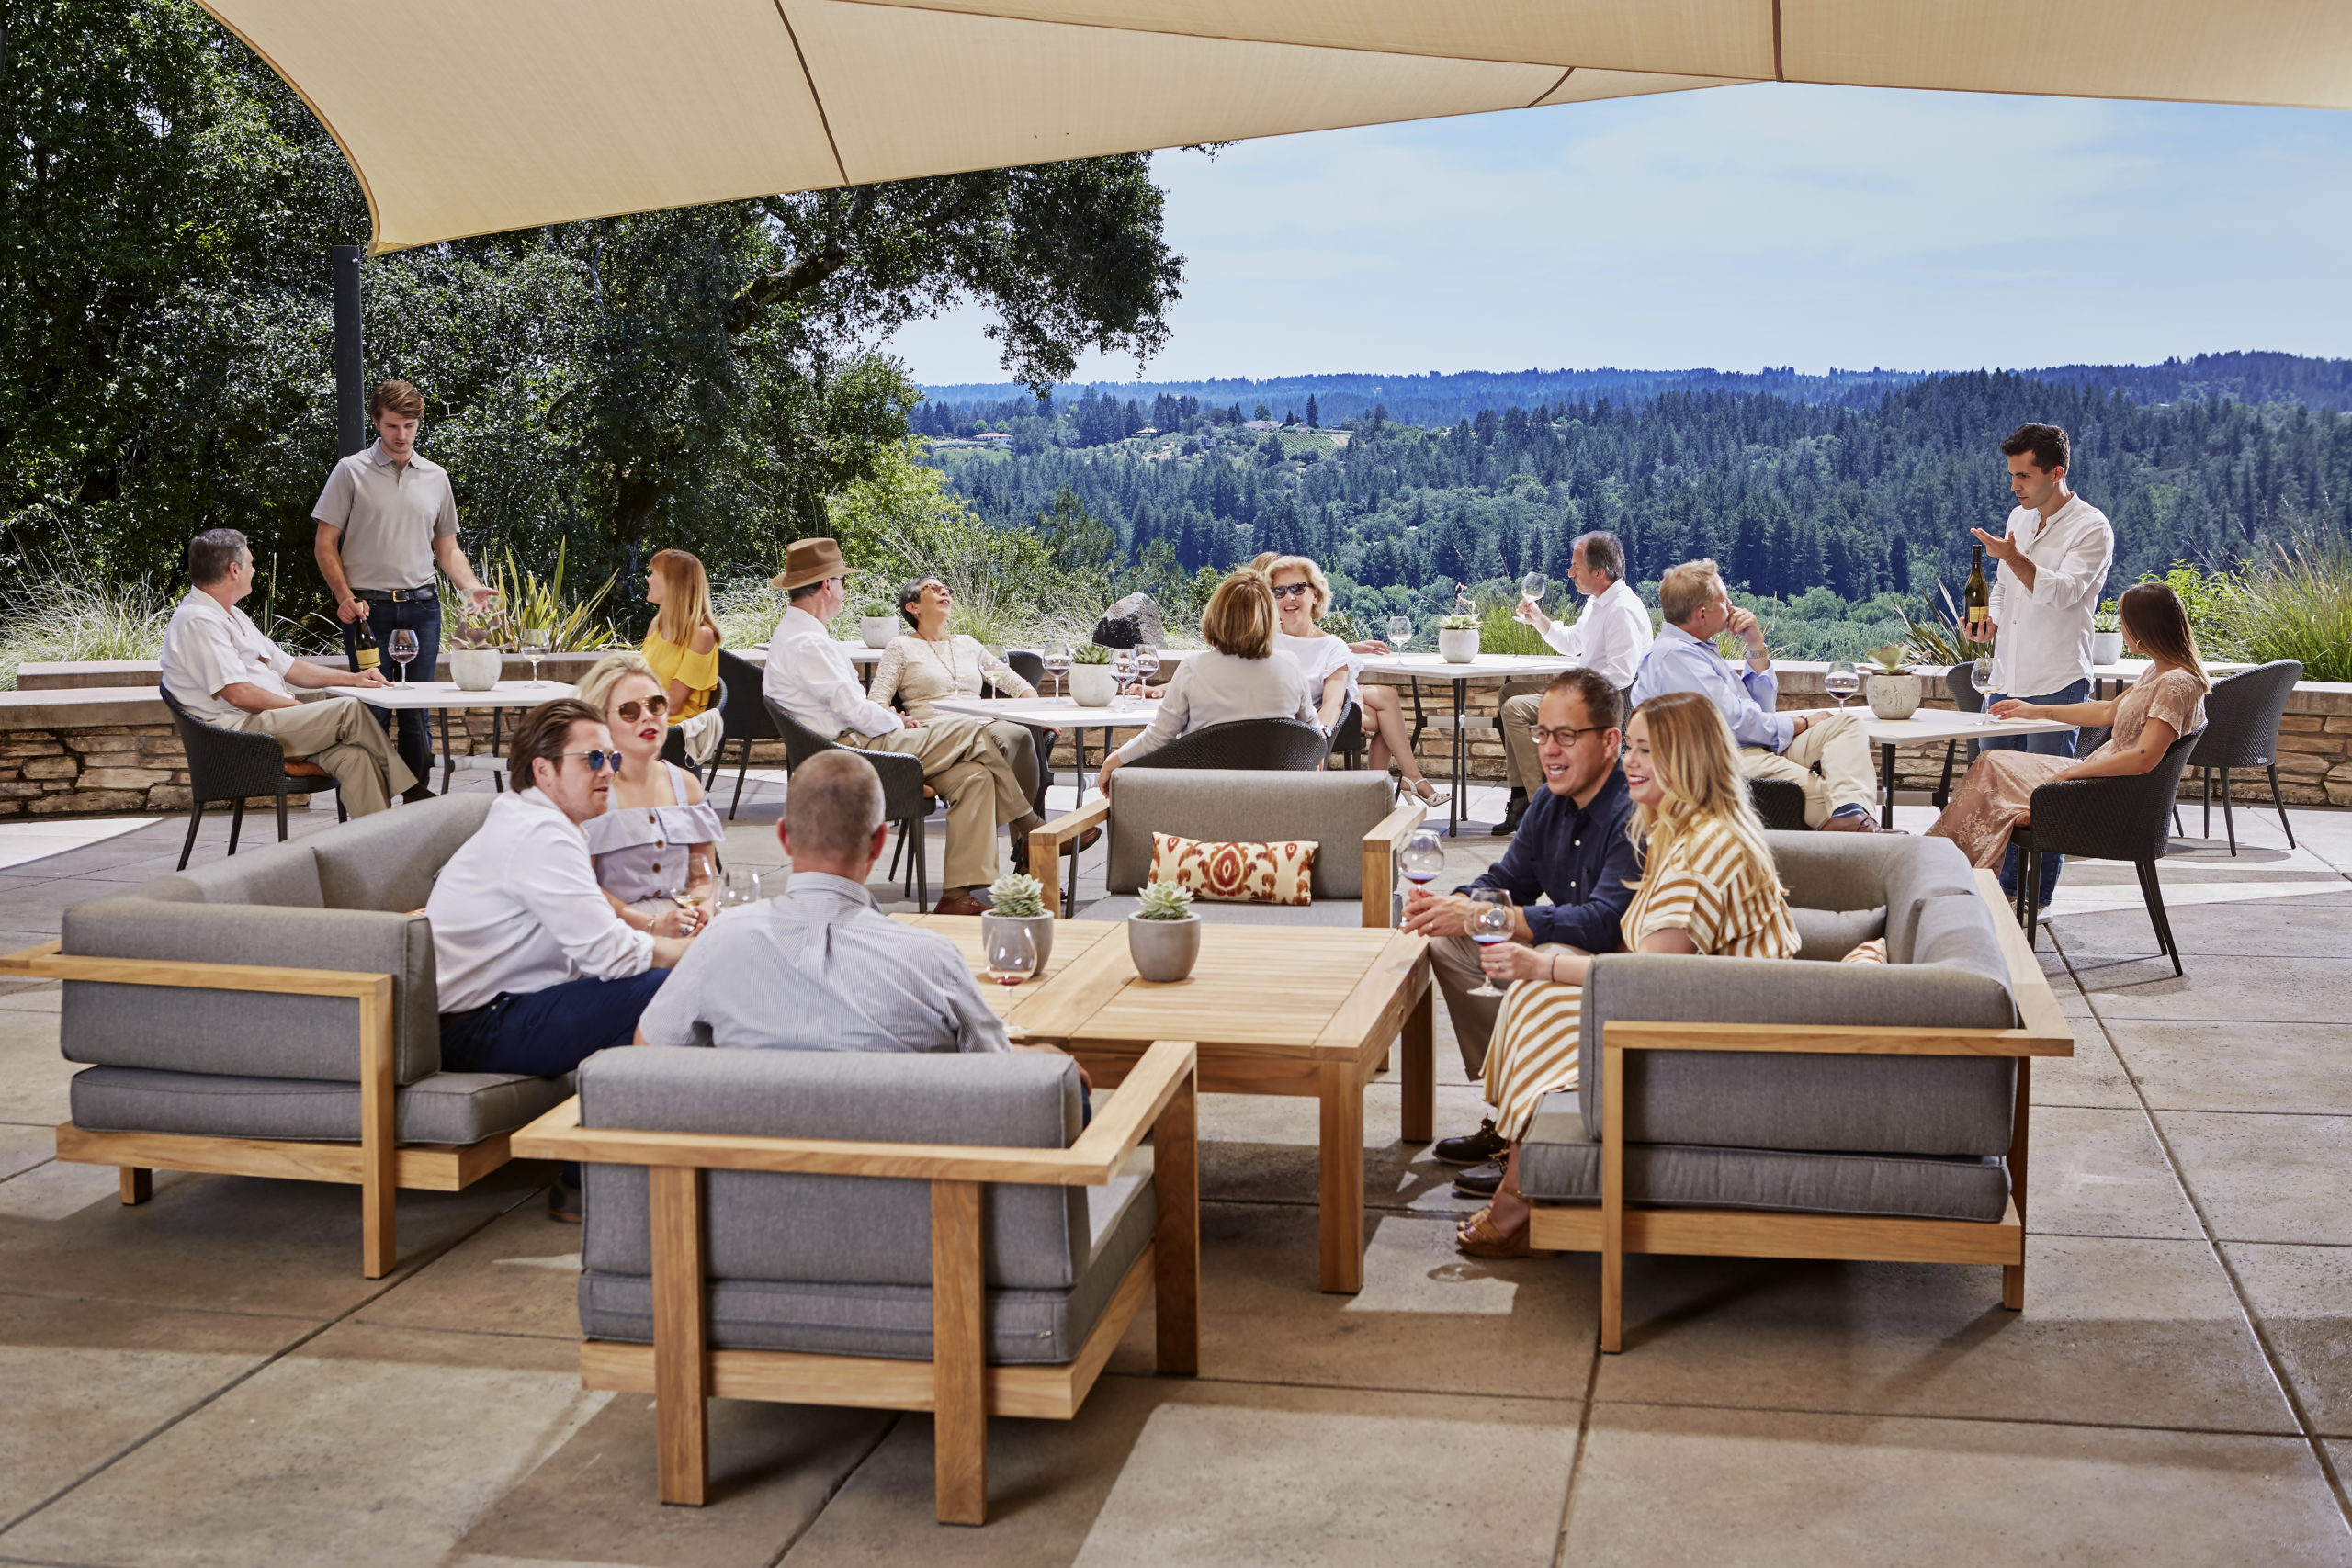 The outdoor terrace at Gary Farrell Vineyards & Winery in Healdsburg. (Gary Farrell Vineyards & Winery)